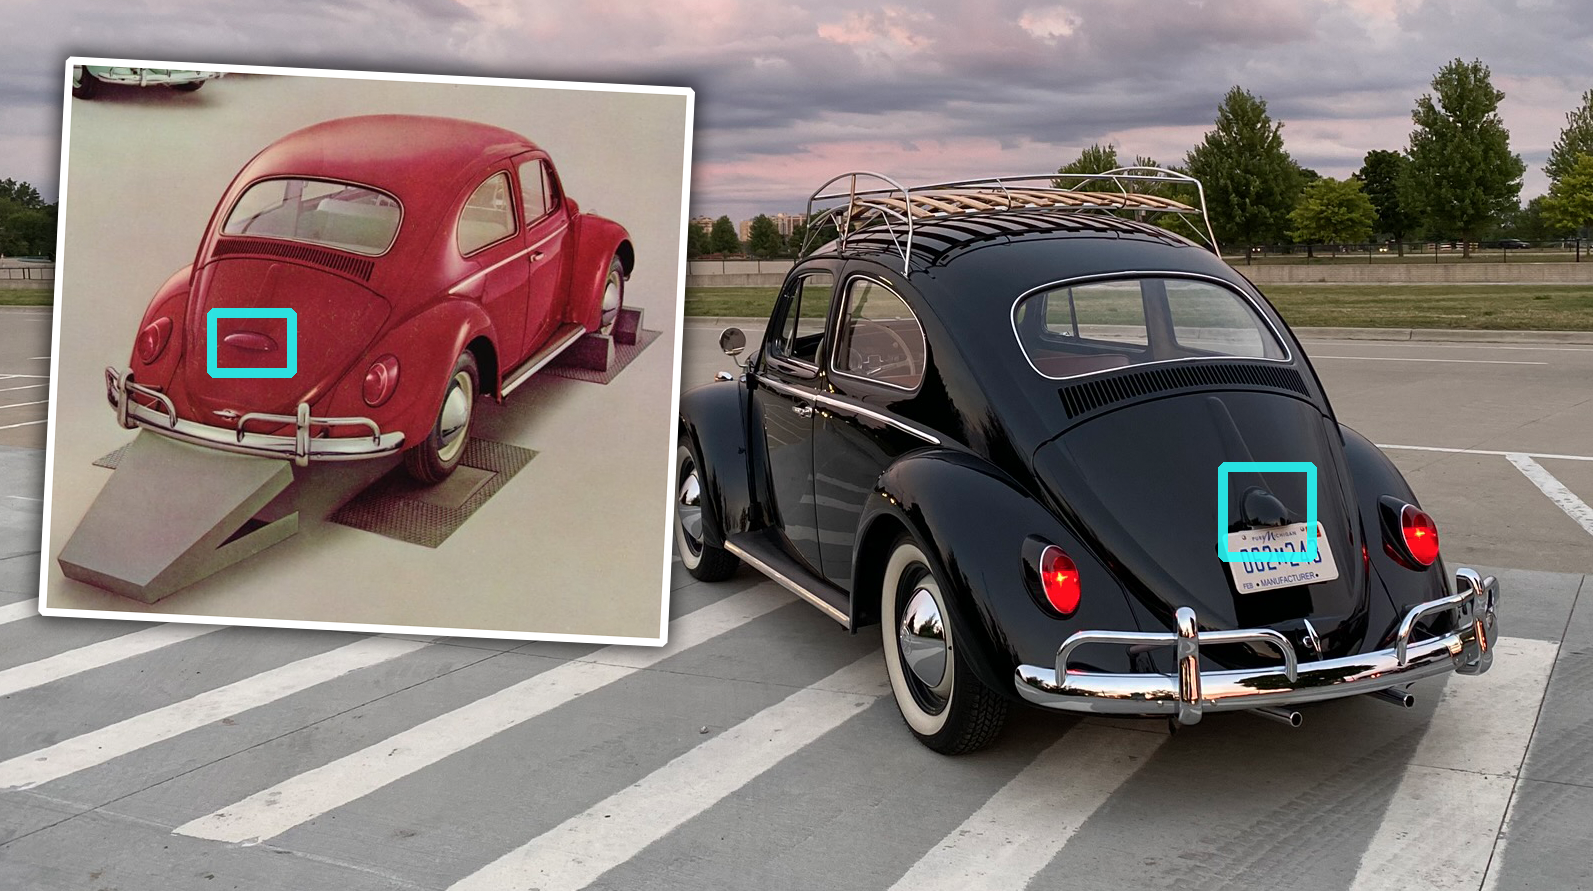 I Have Uncovered Another Volkswagen Mystery And I’m Very Confused About It